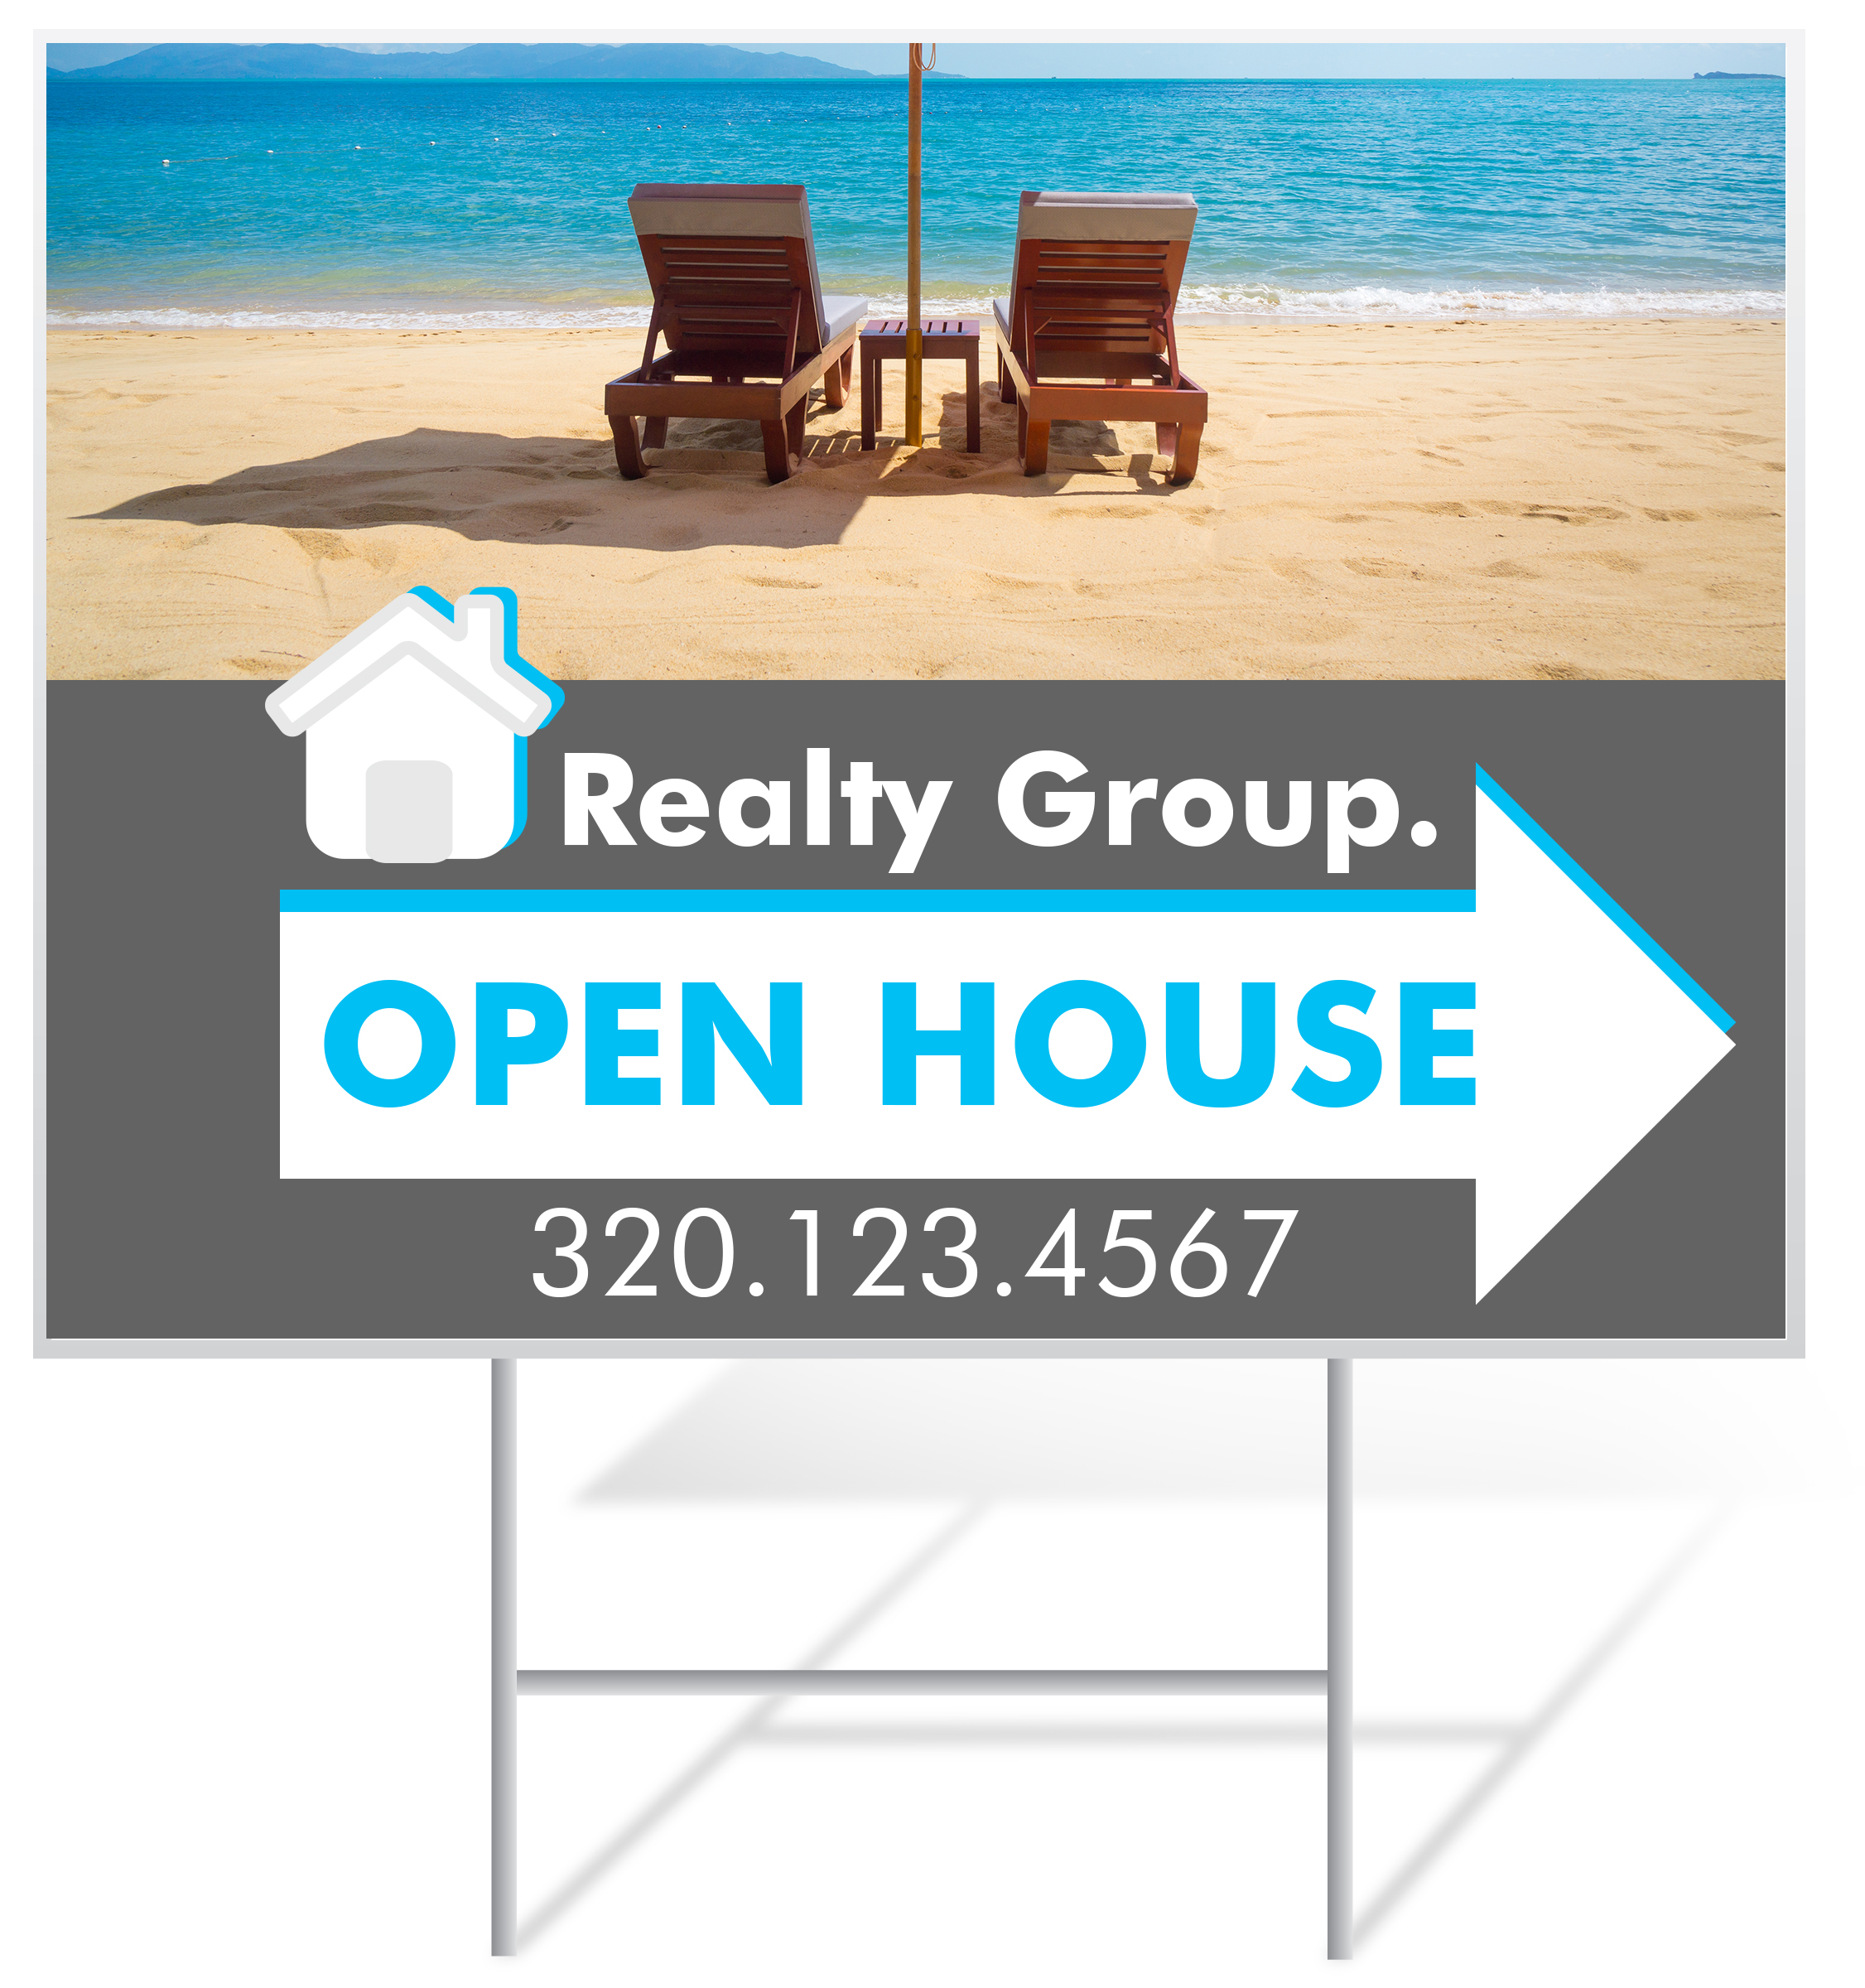 Open House Lawn Sign Example | LawnSigns.com